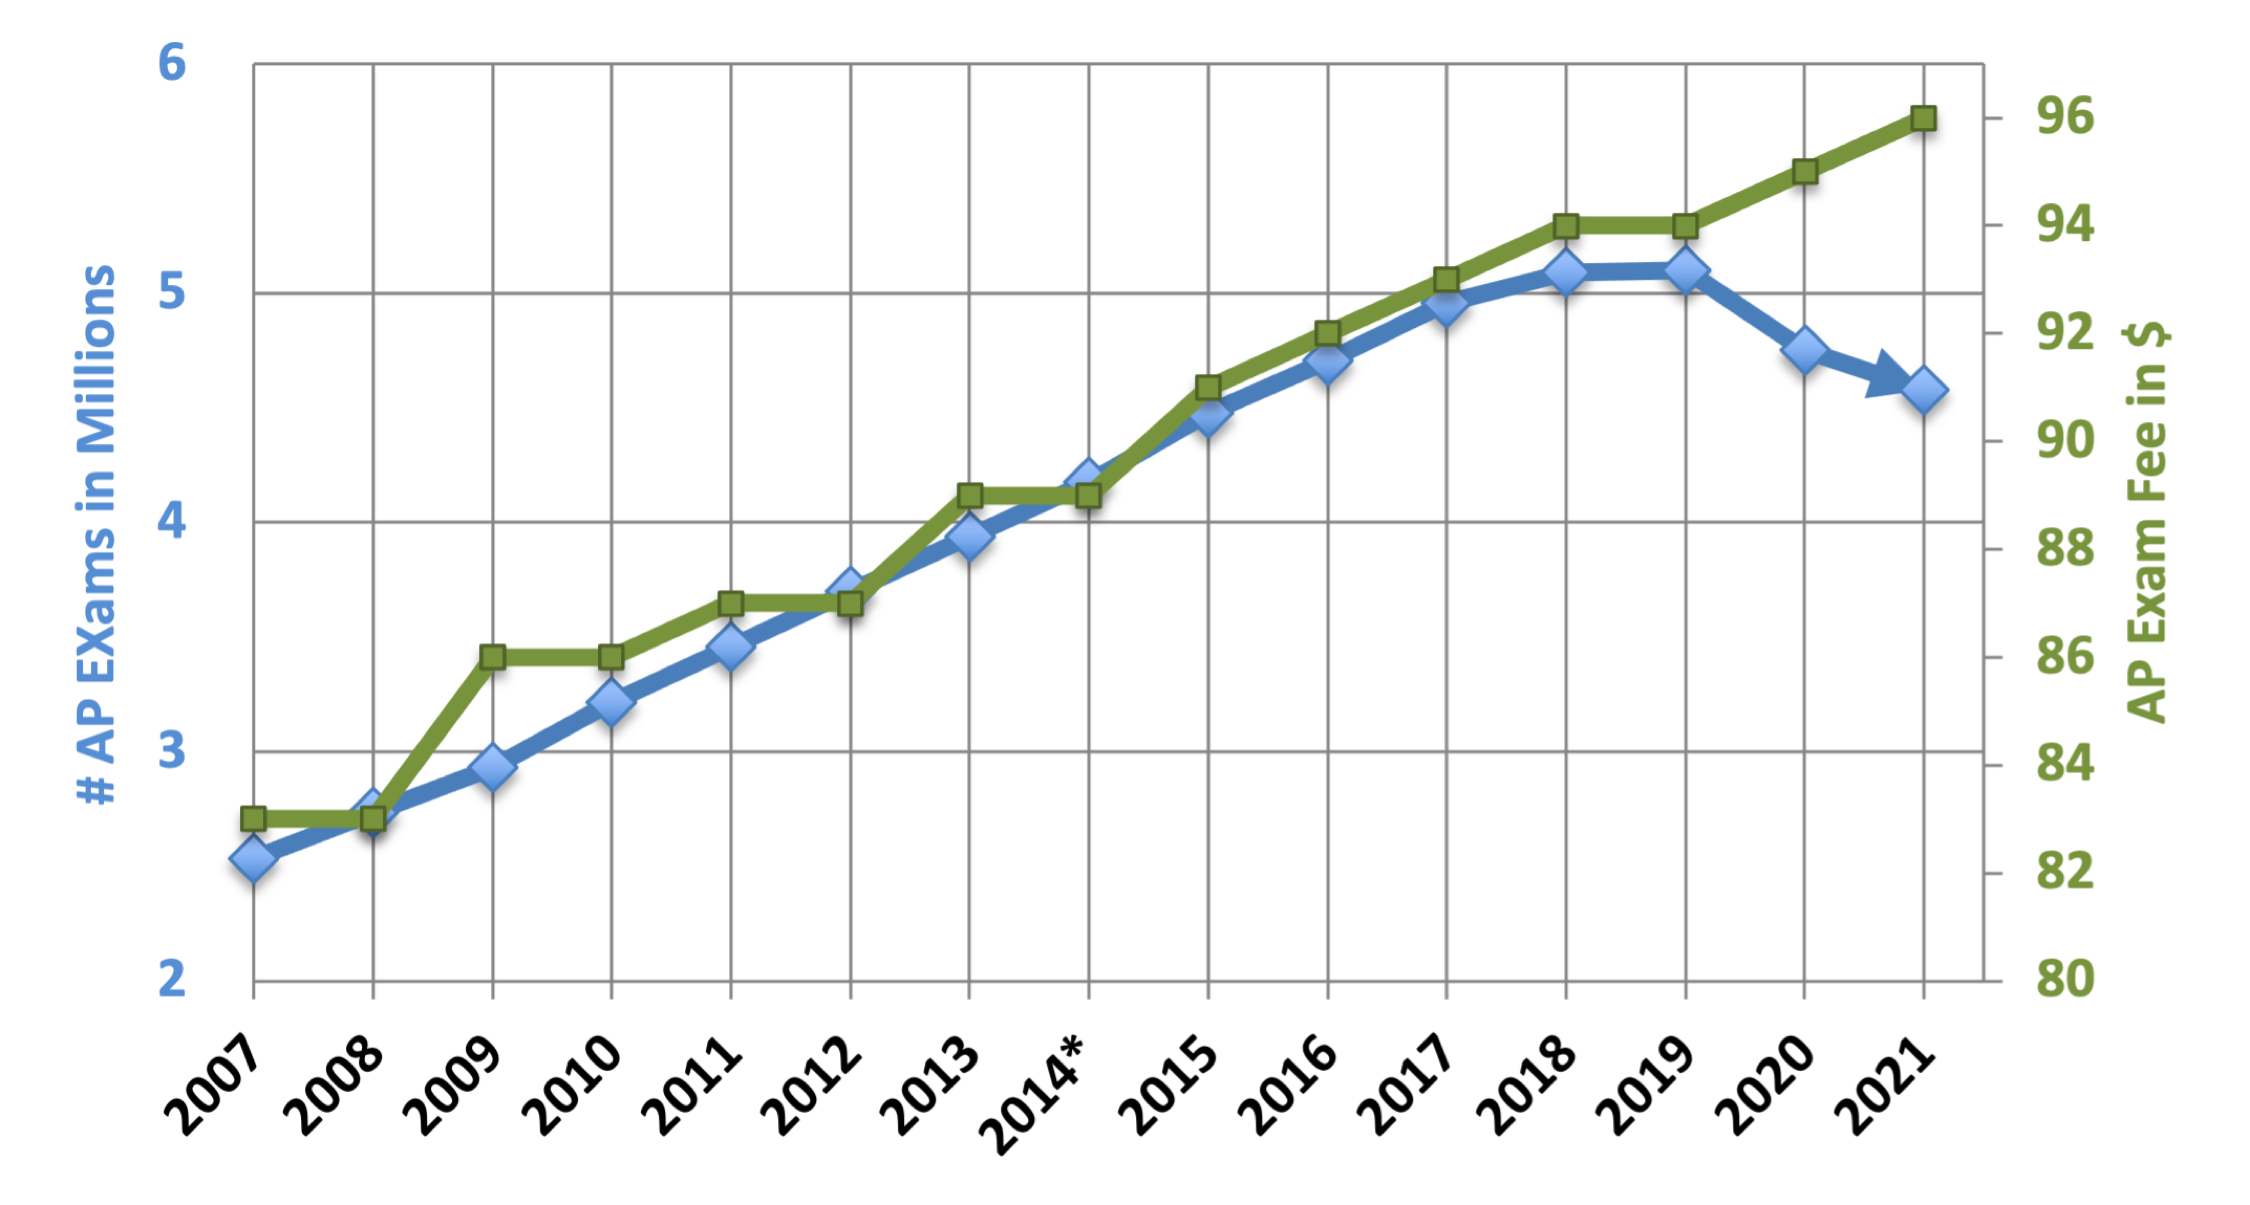 AP Exam Fee History and Number of Exams 2007 to 2021